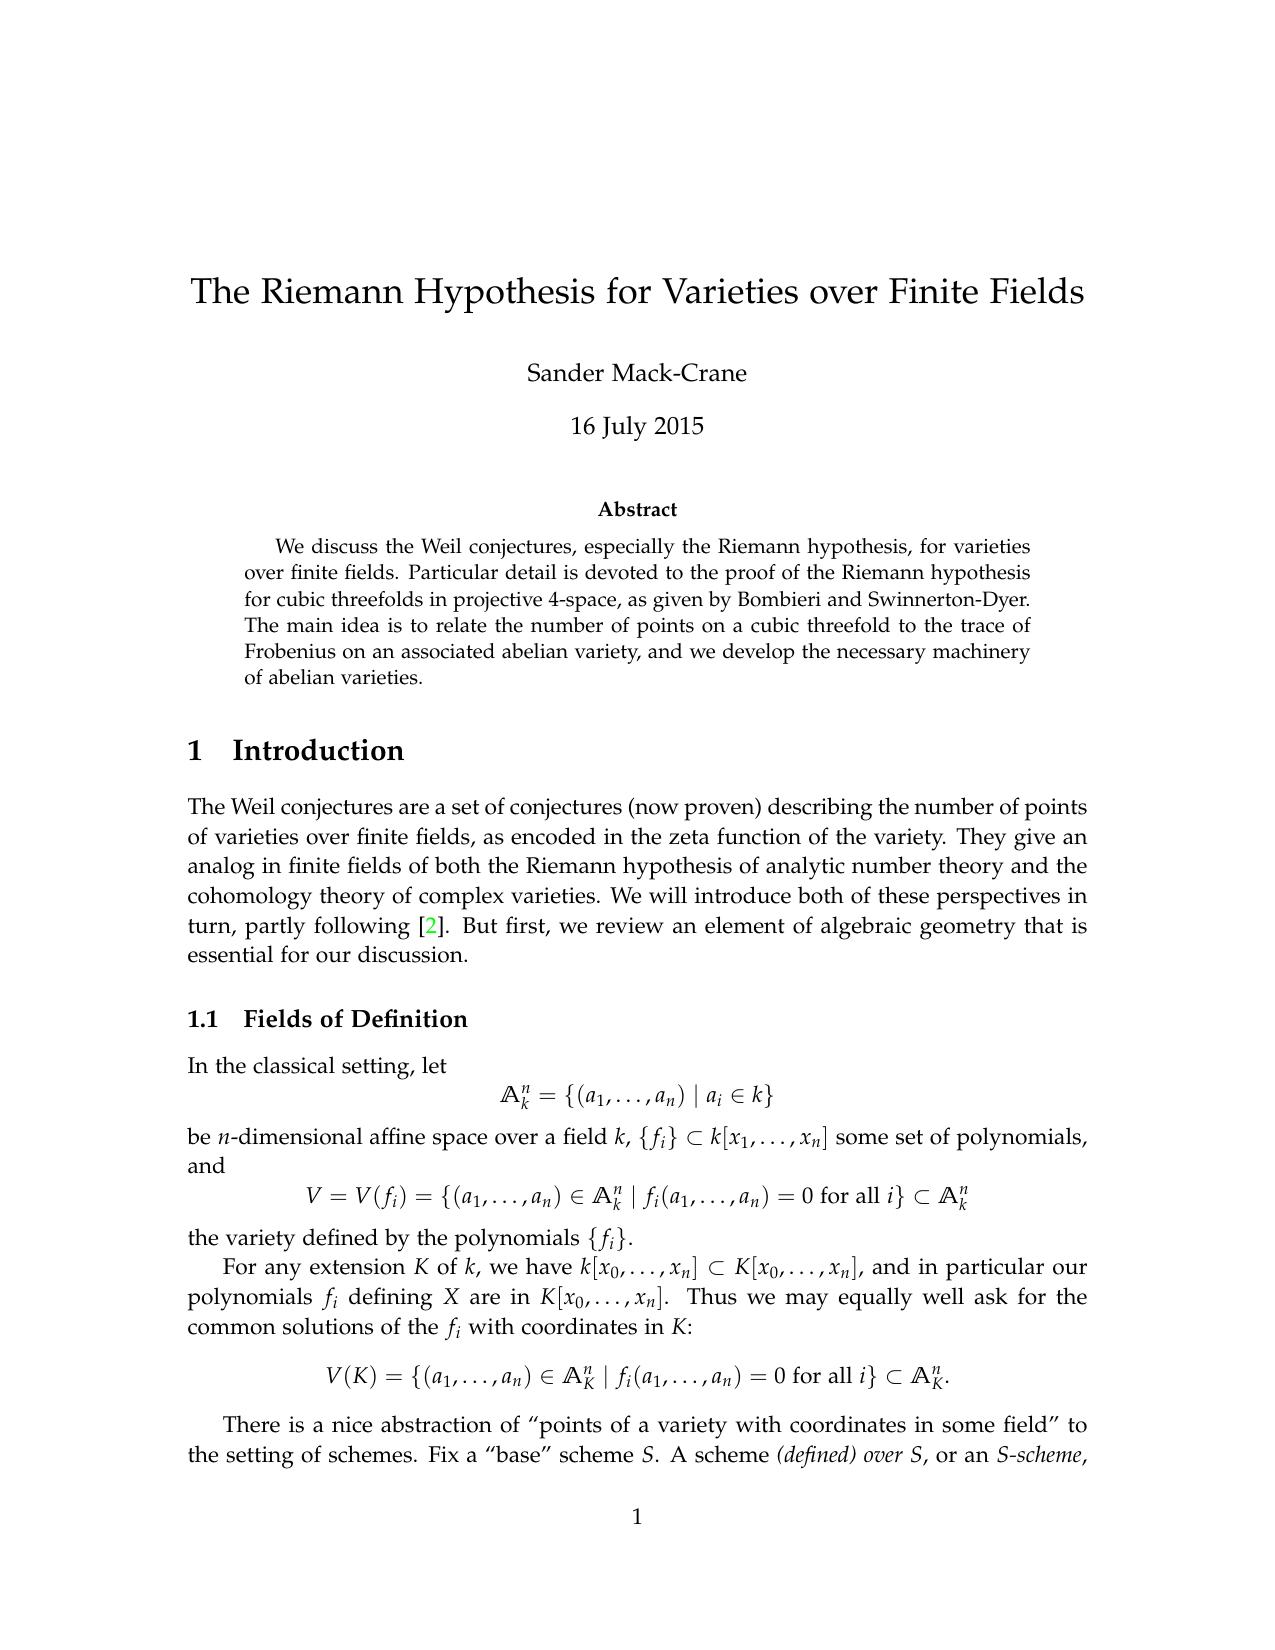 The Riemann Hypothesis for Varieties over Finite Fields - Thesis